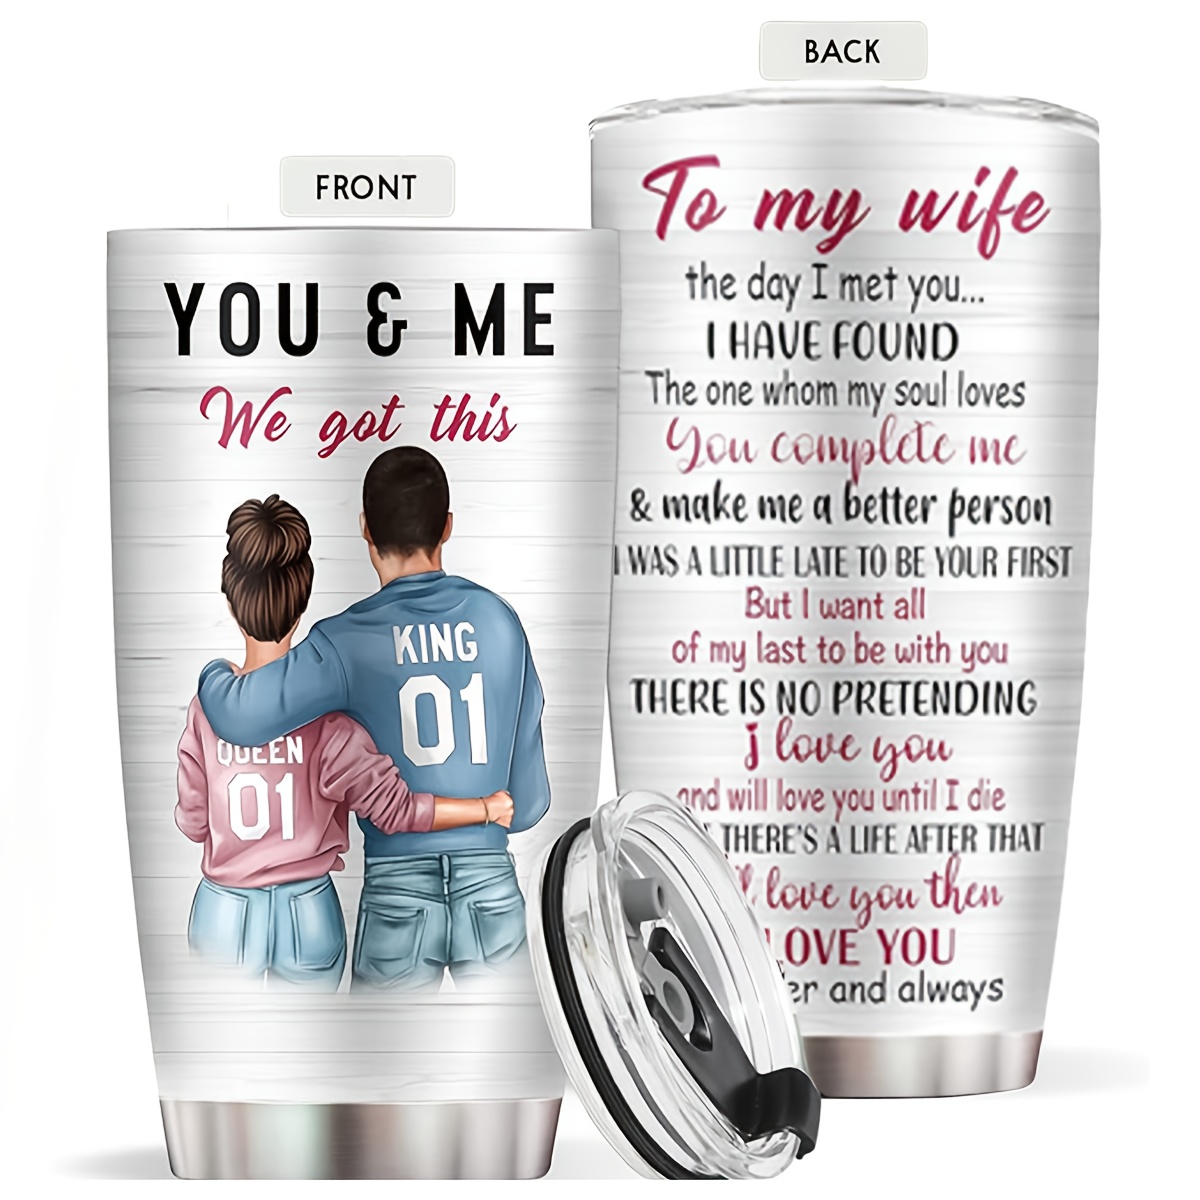 Gifts for Husband - Husband Gifts from Wife - I Love You Gifts for Him for  Anniversary, Husband Birthday Gift, Husband Christmas Gifts - Husband Wood  20oz Stainless Steel Tumbler 